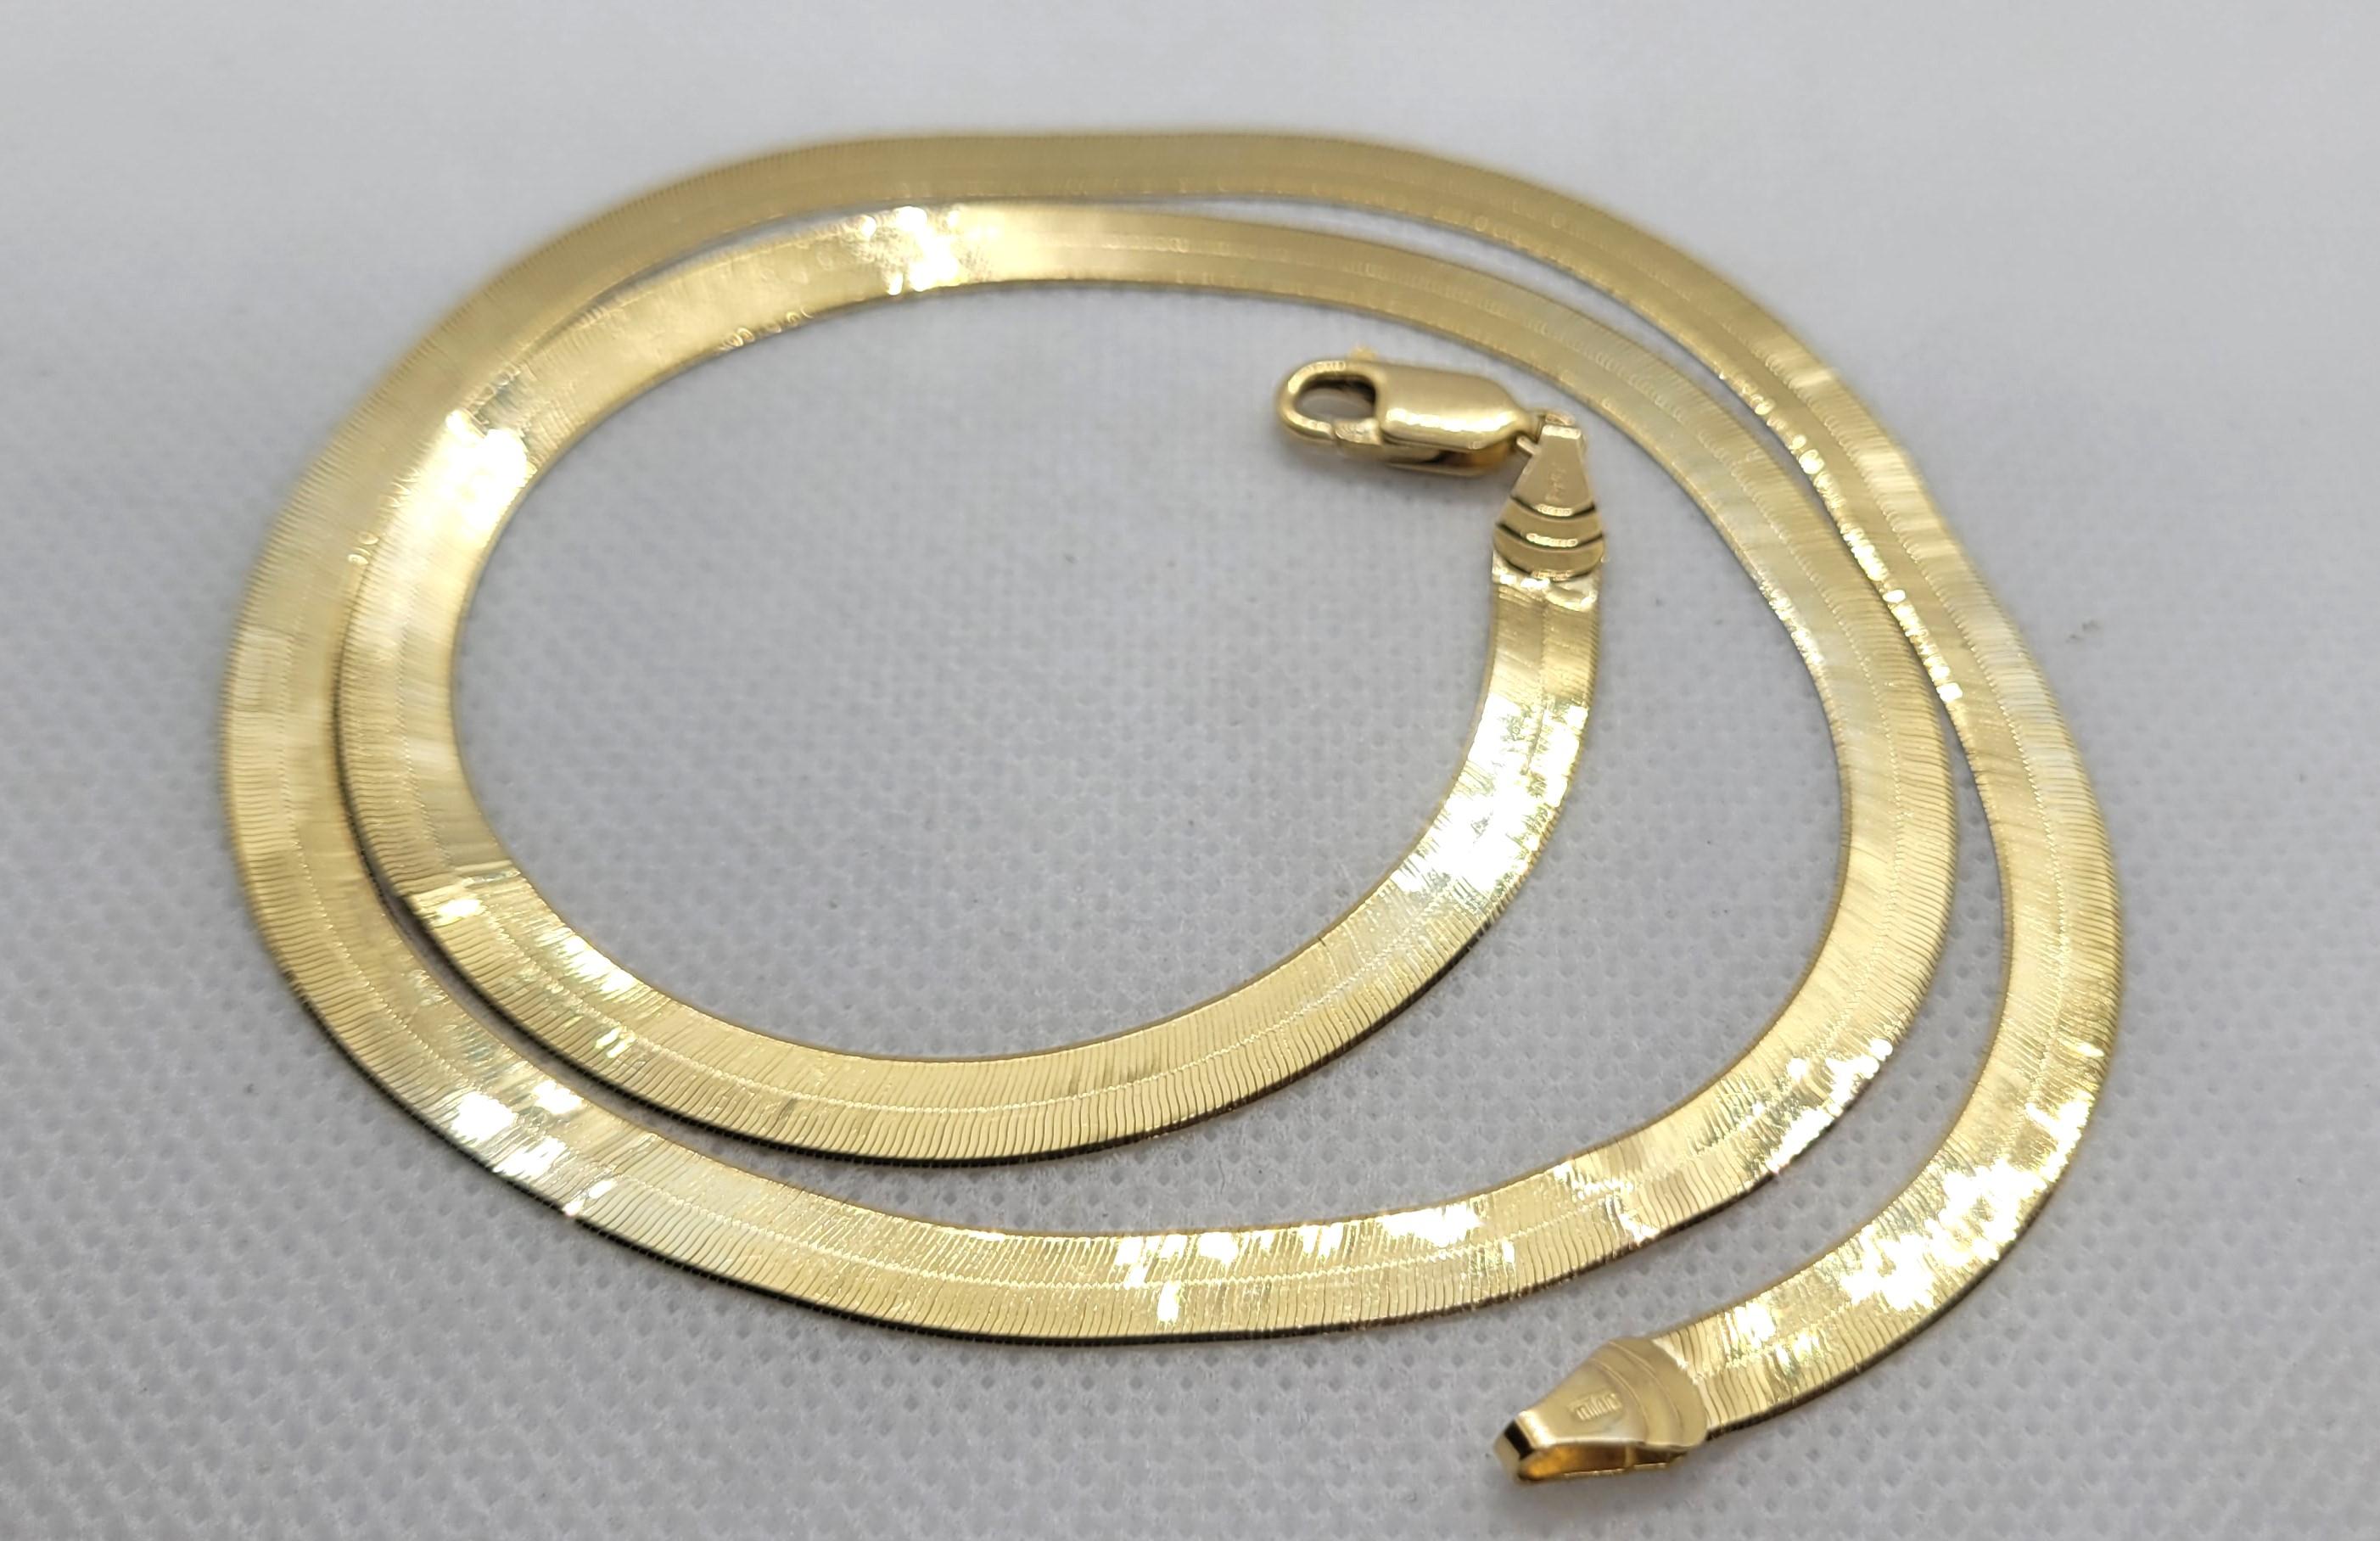 14kt Yellow Gold Herringbone Chain, 20 Inches, Italian Made, 5.2mm Wide, Milor. This Italian-made 14kt yellow gold herringbone chain is an exquisite piece of jewelry that exudes elegance and style. With its 20-inch length and 5.2mm width, it is the